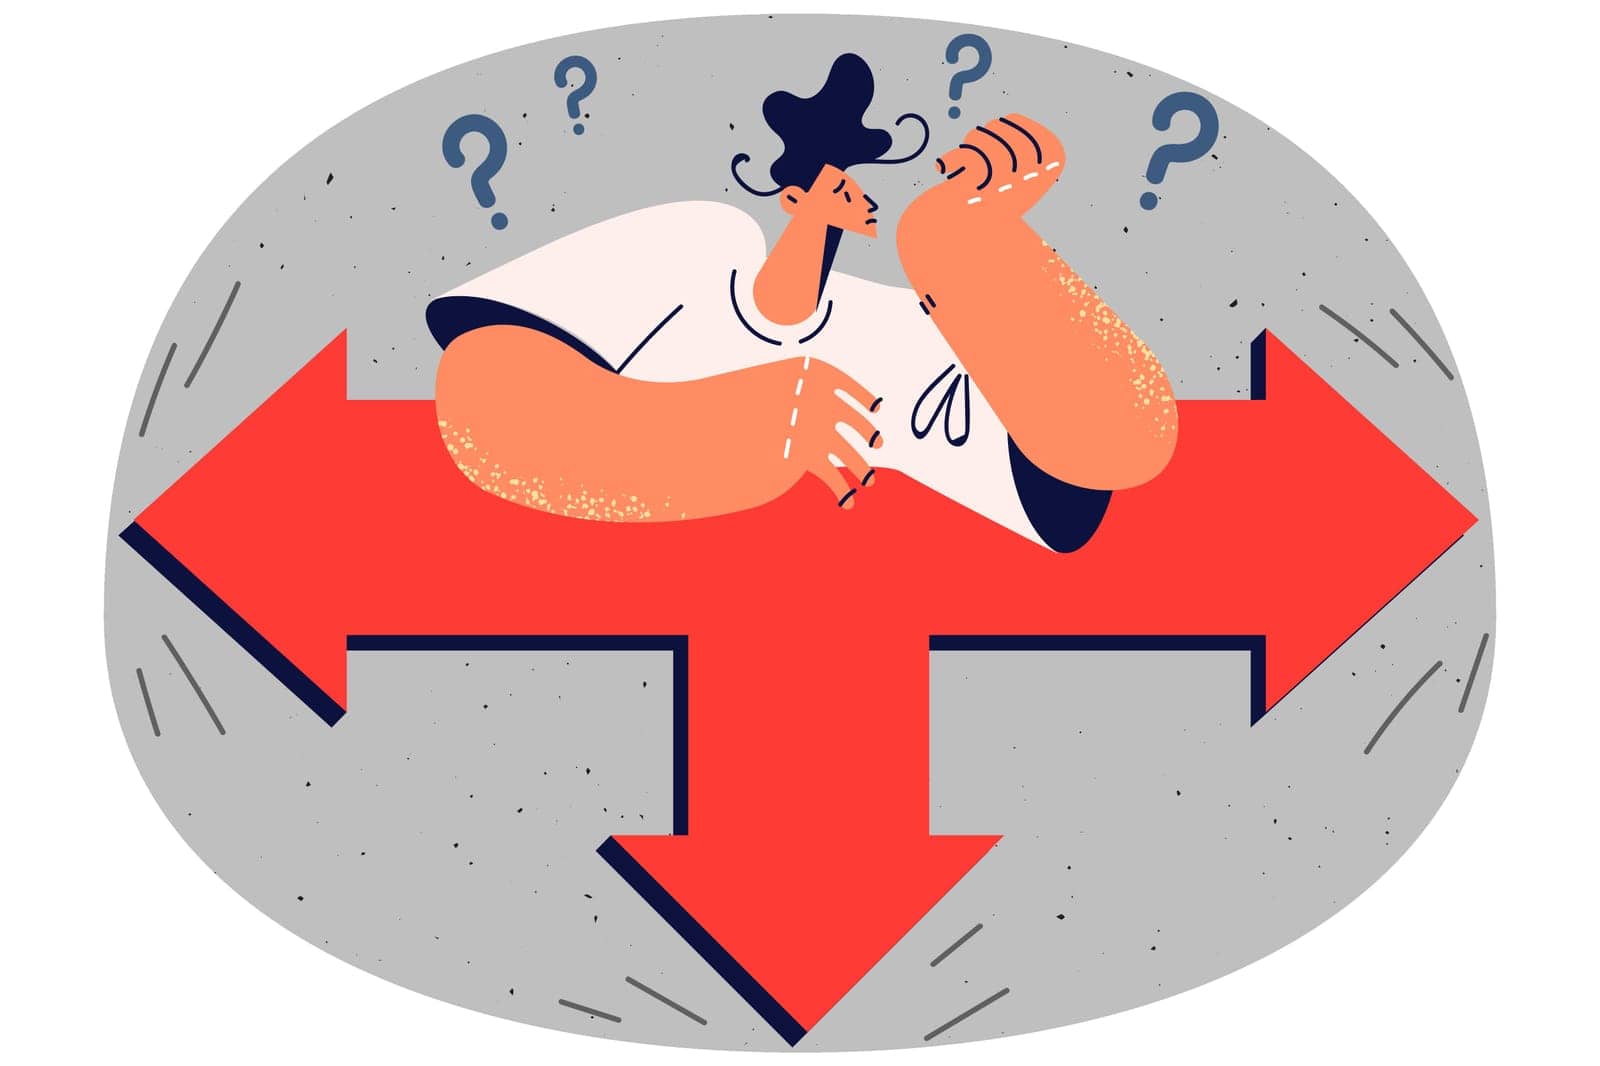 Pensive man thinking making decision about career change. Frustrated male feel confused stand on crossroad deciding which way to take. Vector illustration.